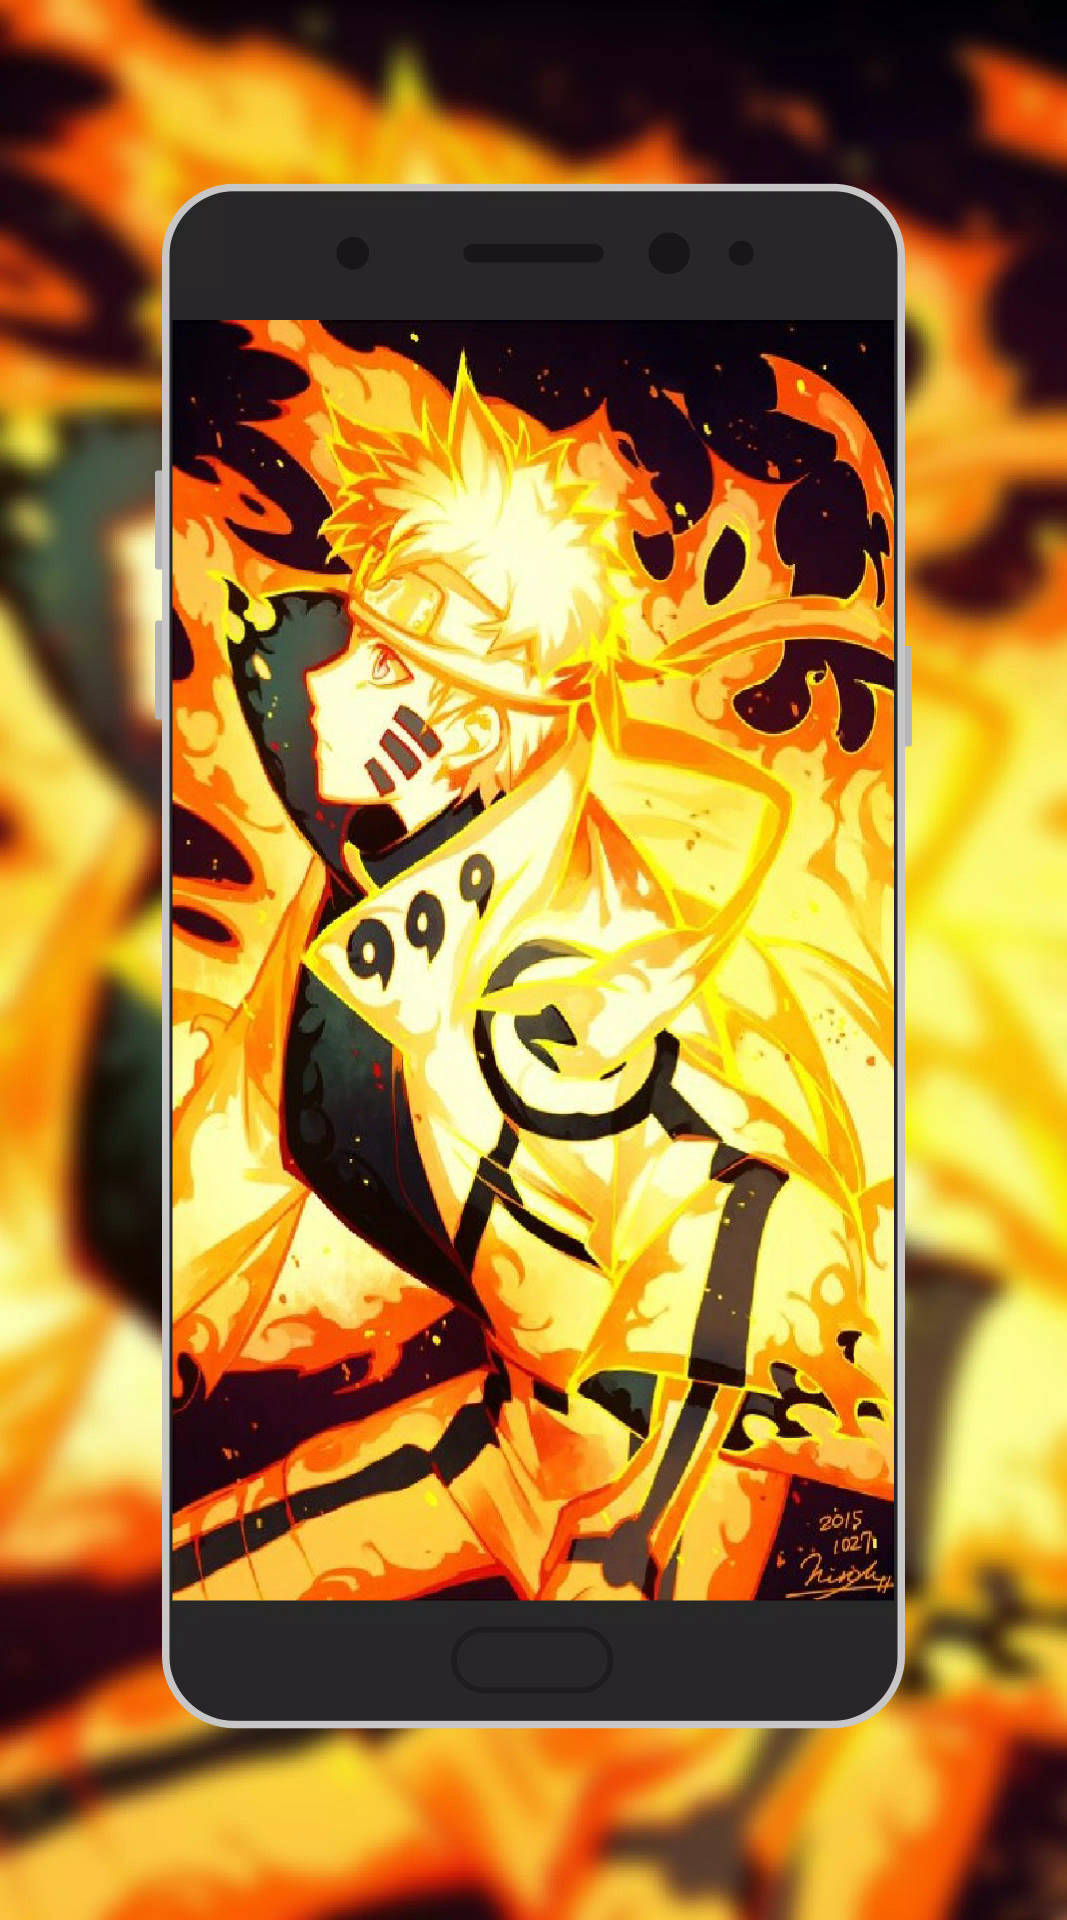 A Phone With An Image Of A Character In Flames Wallpaper